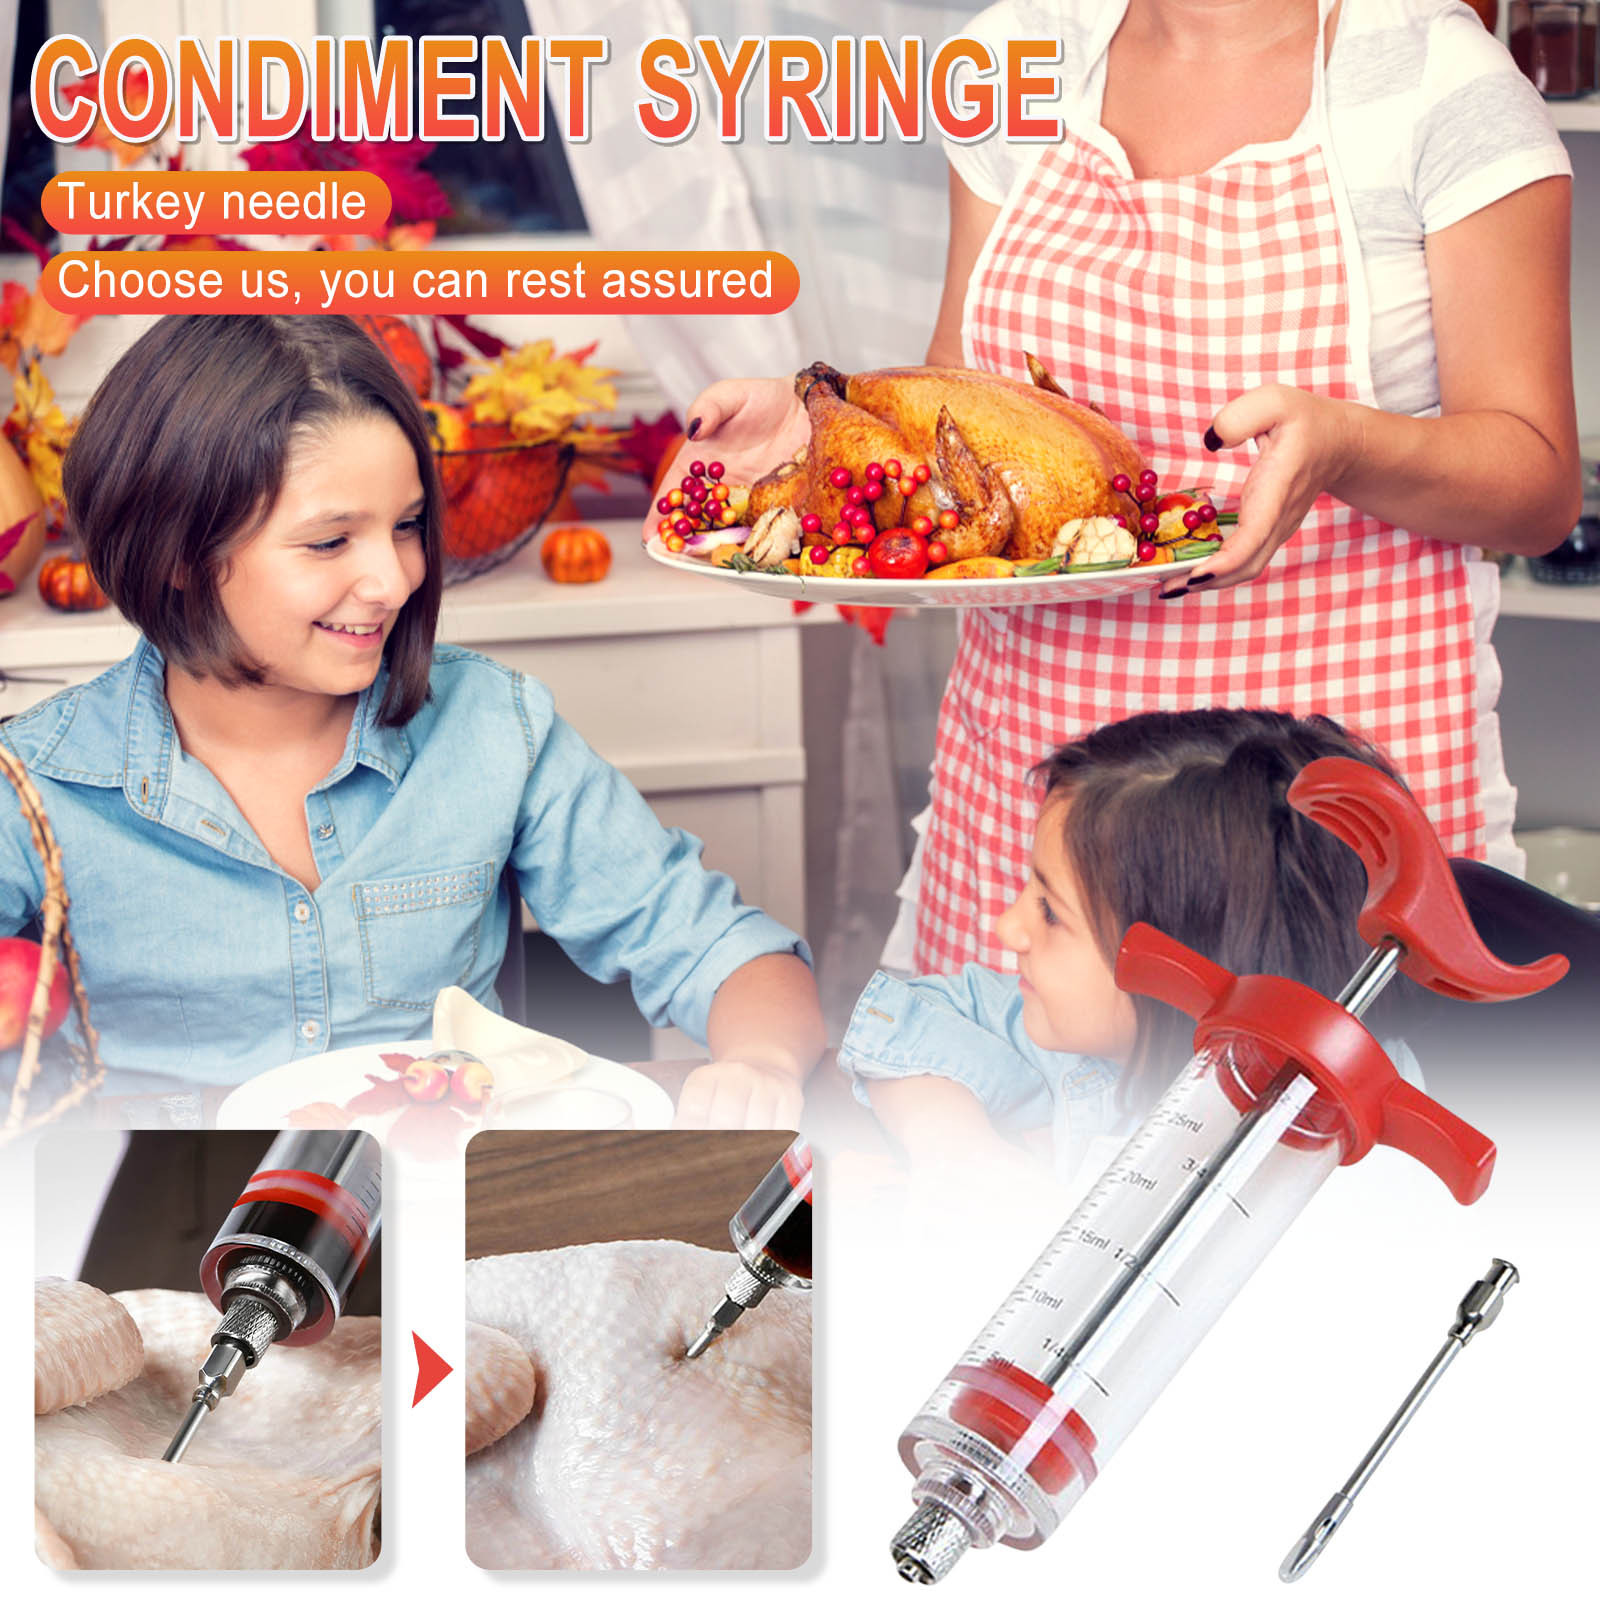 Herrnalise Stainless Steel Meat Injector Syringe For BBQ Grill Professional-Smoker Seasoning Culinary Barbecue Syringe Barbecue Tool Kitchen Essentials on Sale - image 1 of 9